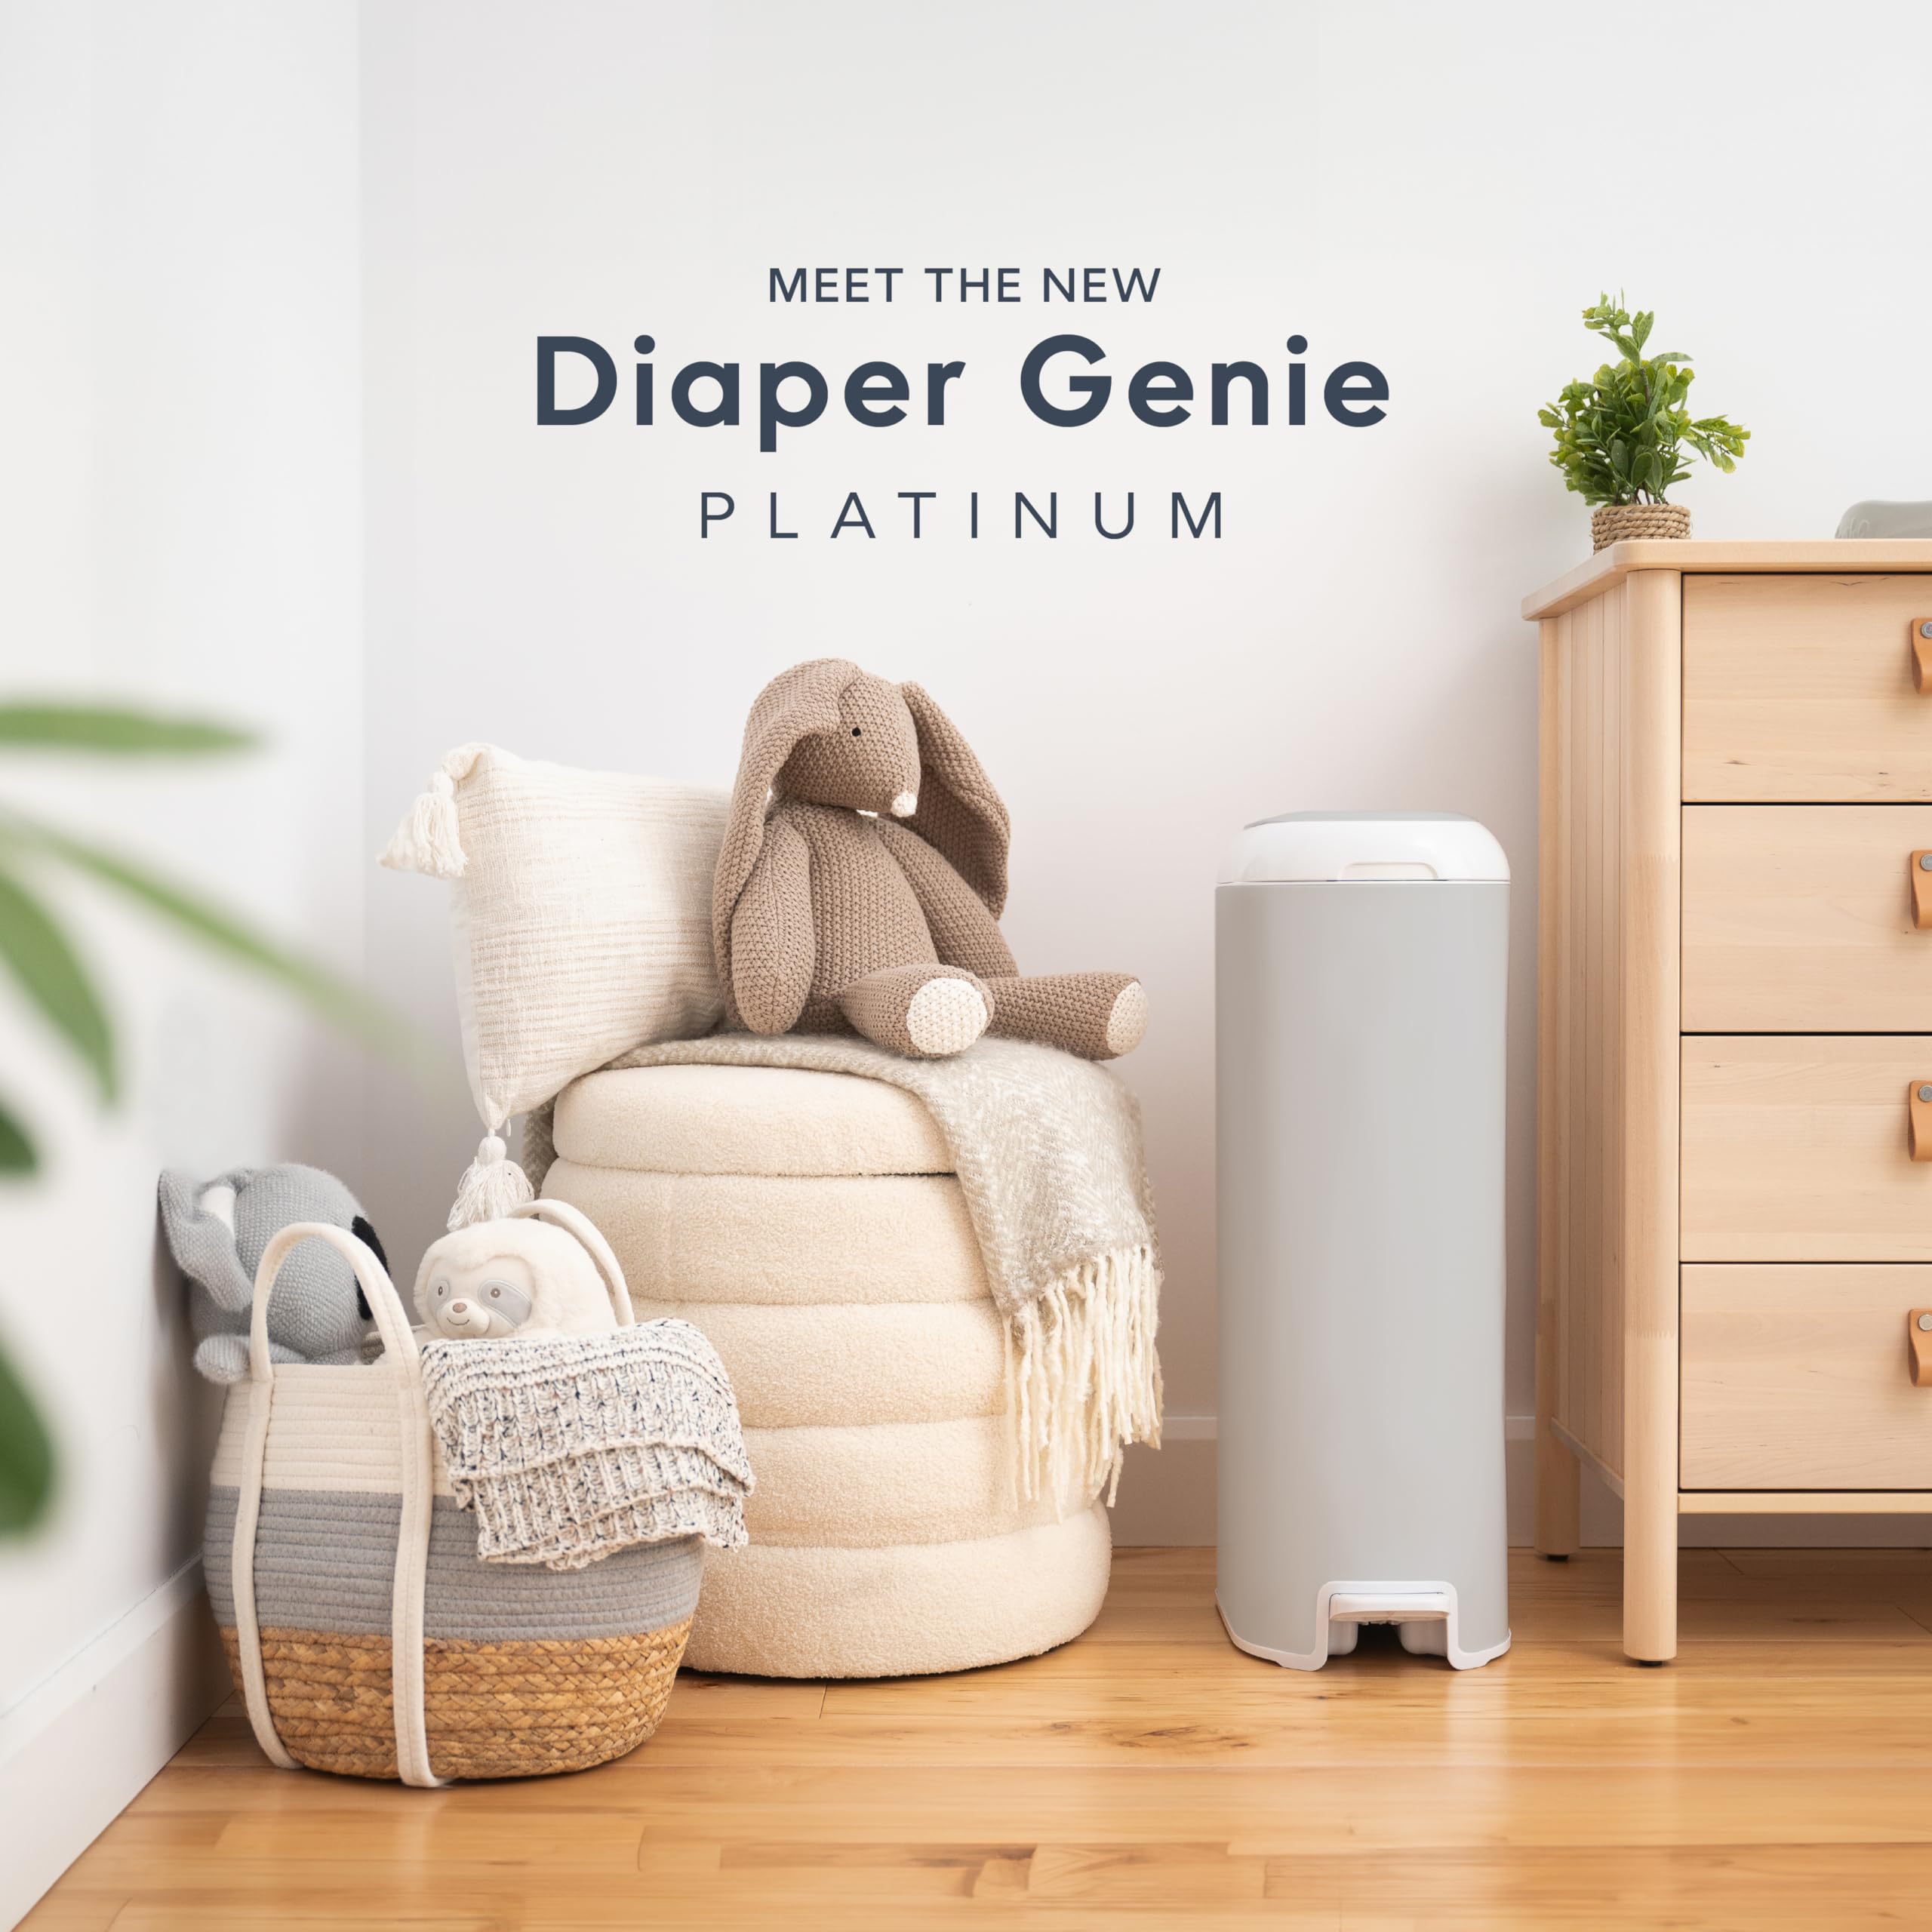 Diaper Genie Platinum Pail (Stone Grey) is Made in Durable Stainless Steel and Includes 1 Easy Roll Refill with 18 Bags That can Last up to 5 Months.